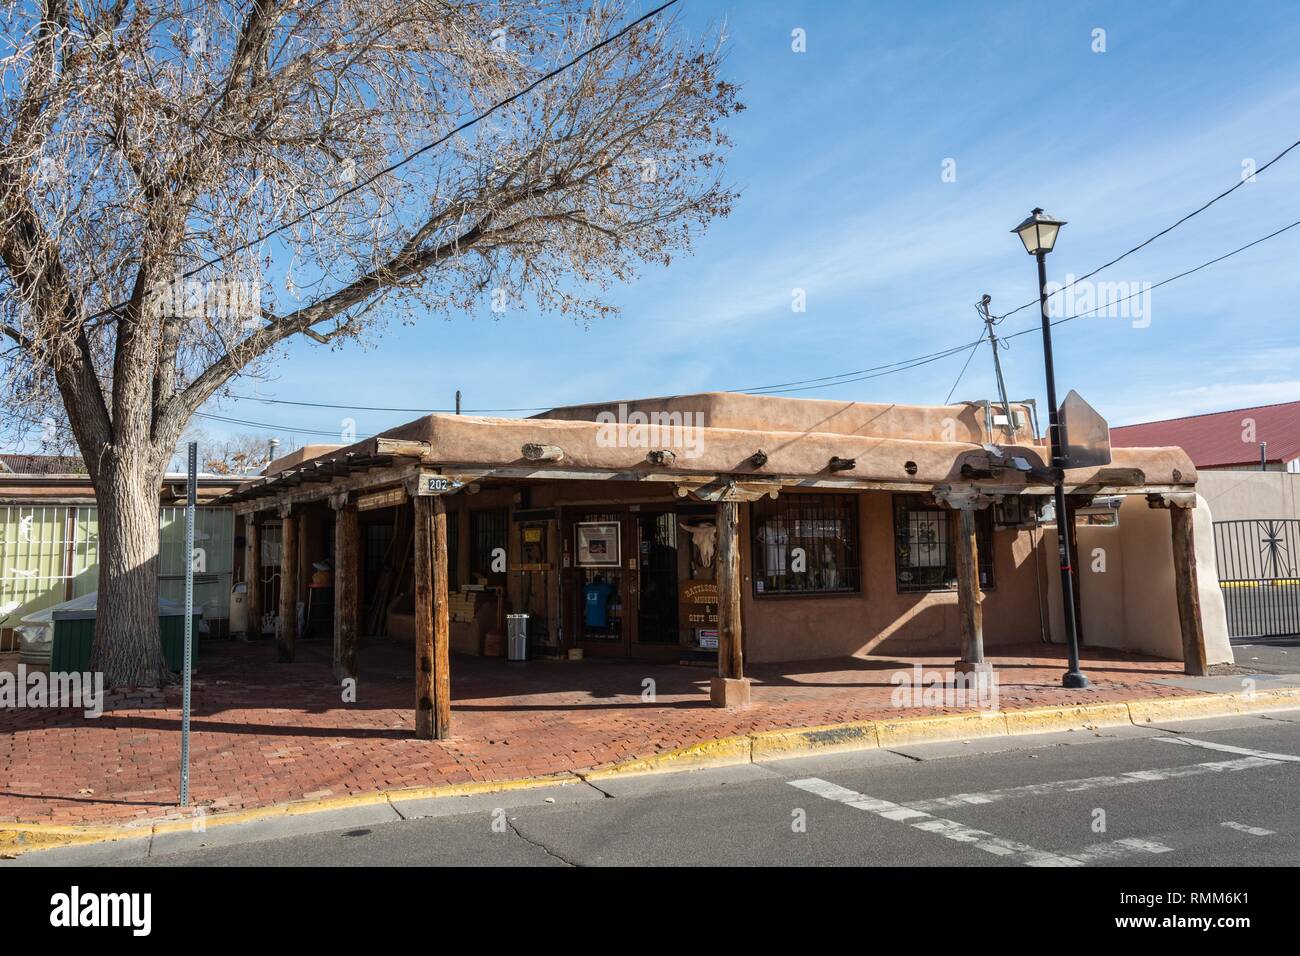 Albuquerque, New Mexico, United States of America - January 3, 2017. Exterior view of American International Rattlesnake Museum in Albuquerque, NM. Stock Photo